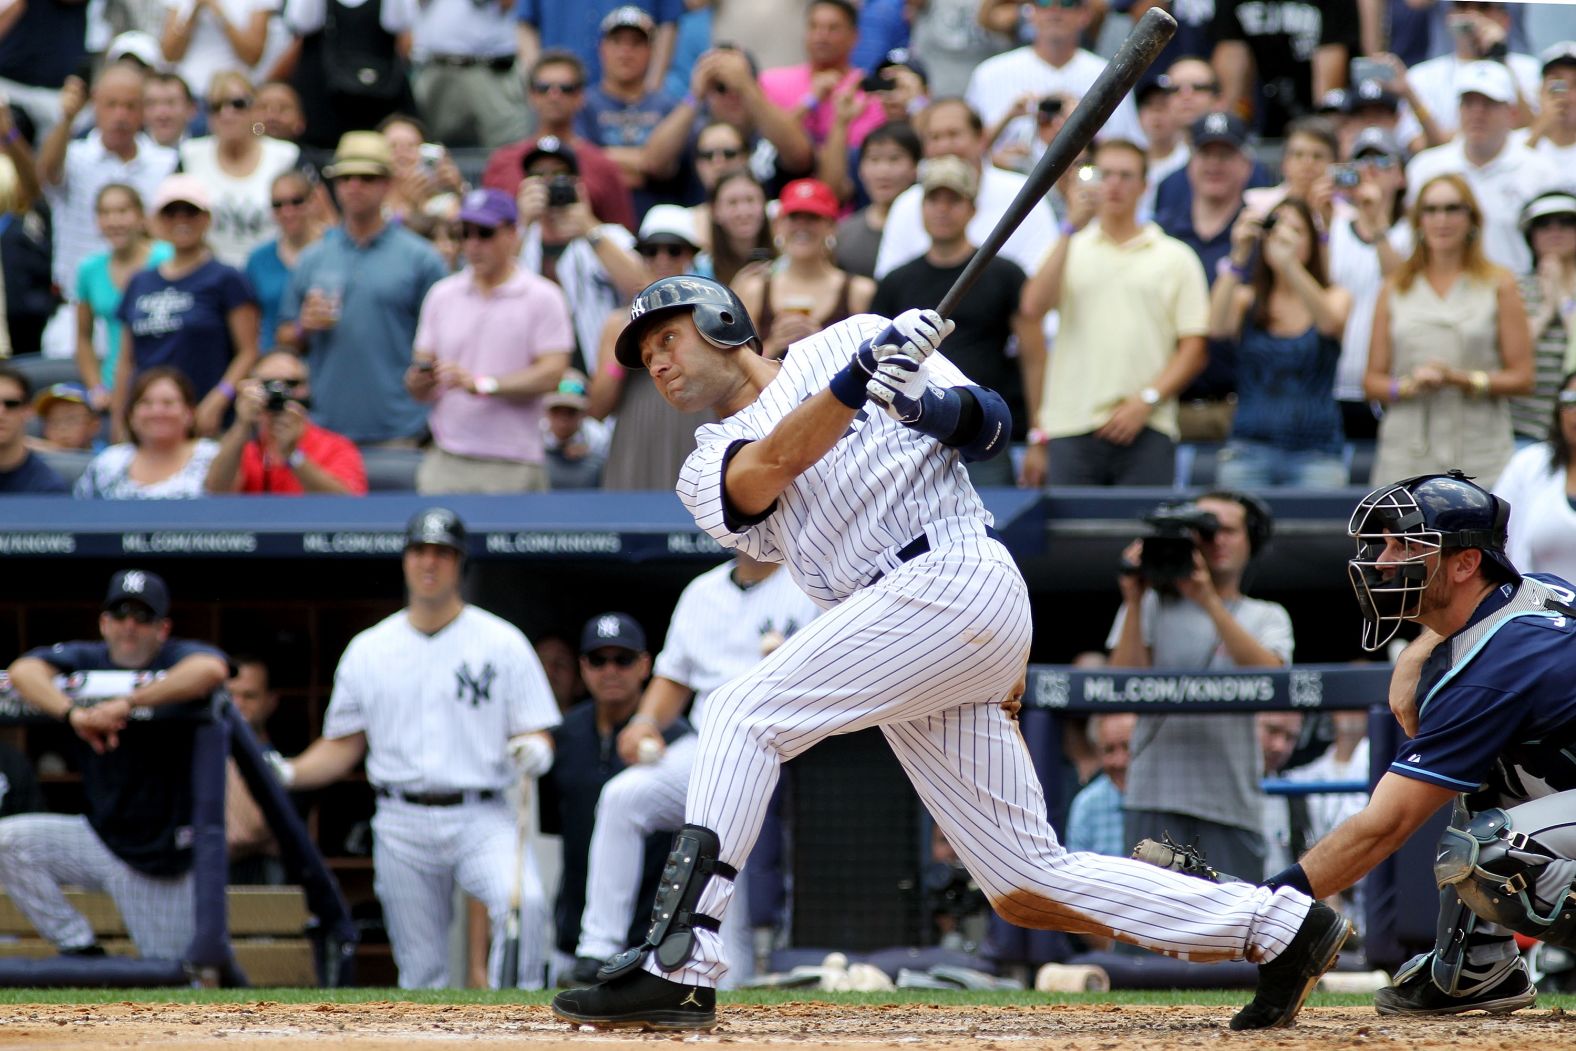 Jeter connects on a solo home run for his 3,000th career hit on July 9, 2011. He was the 28th player in Major League history to reach the milestone.